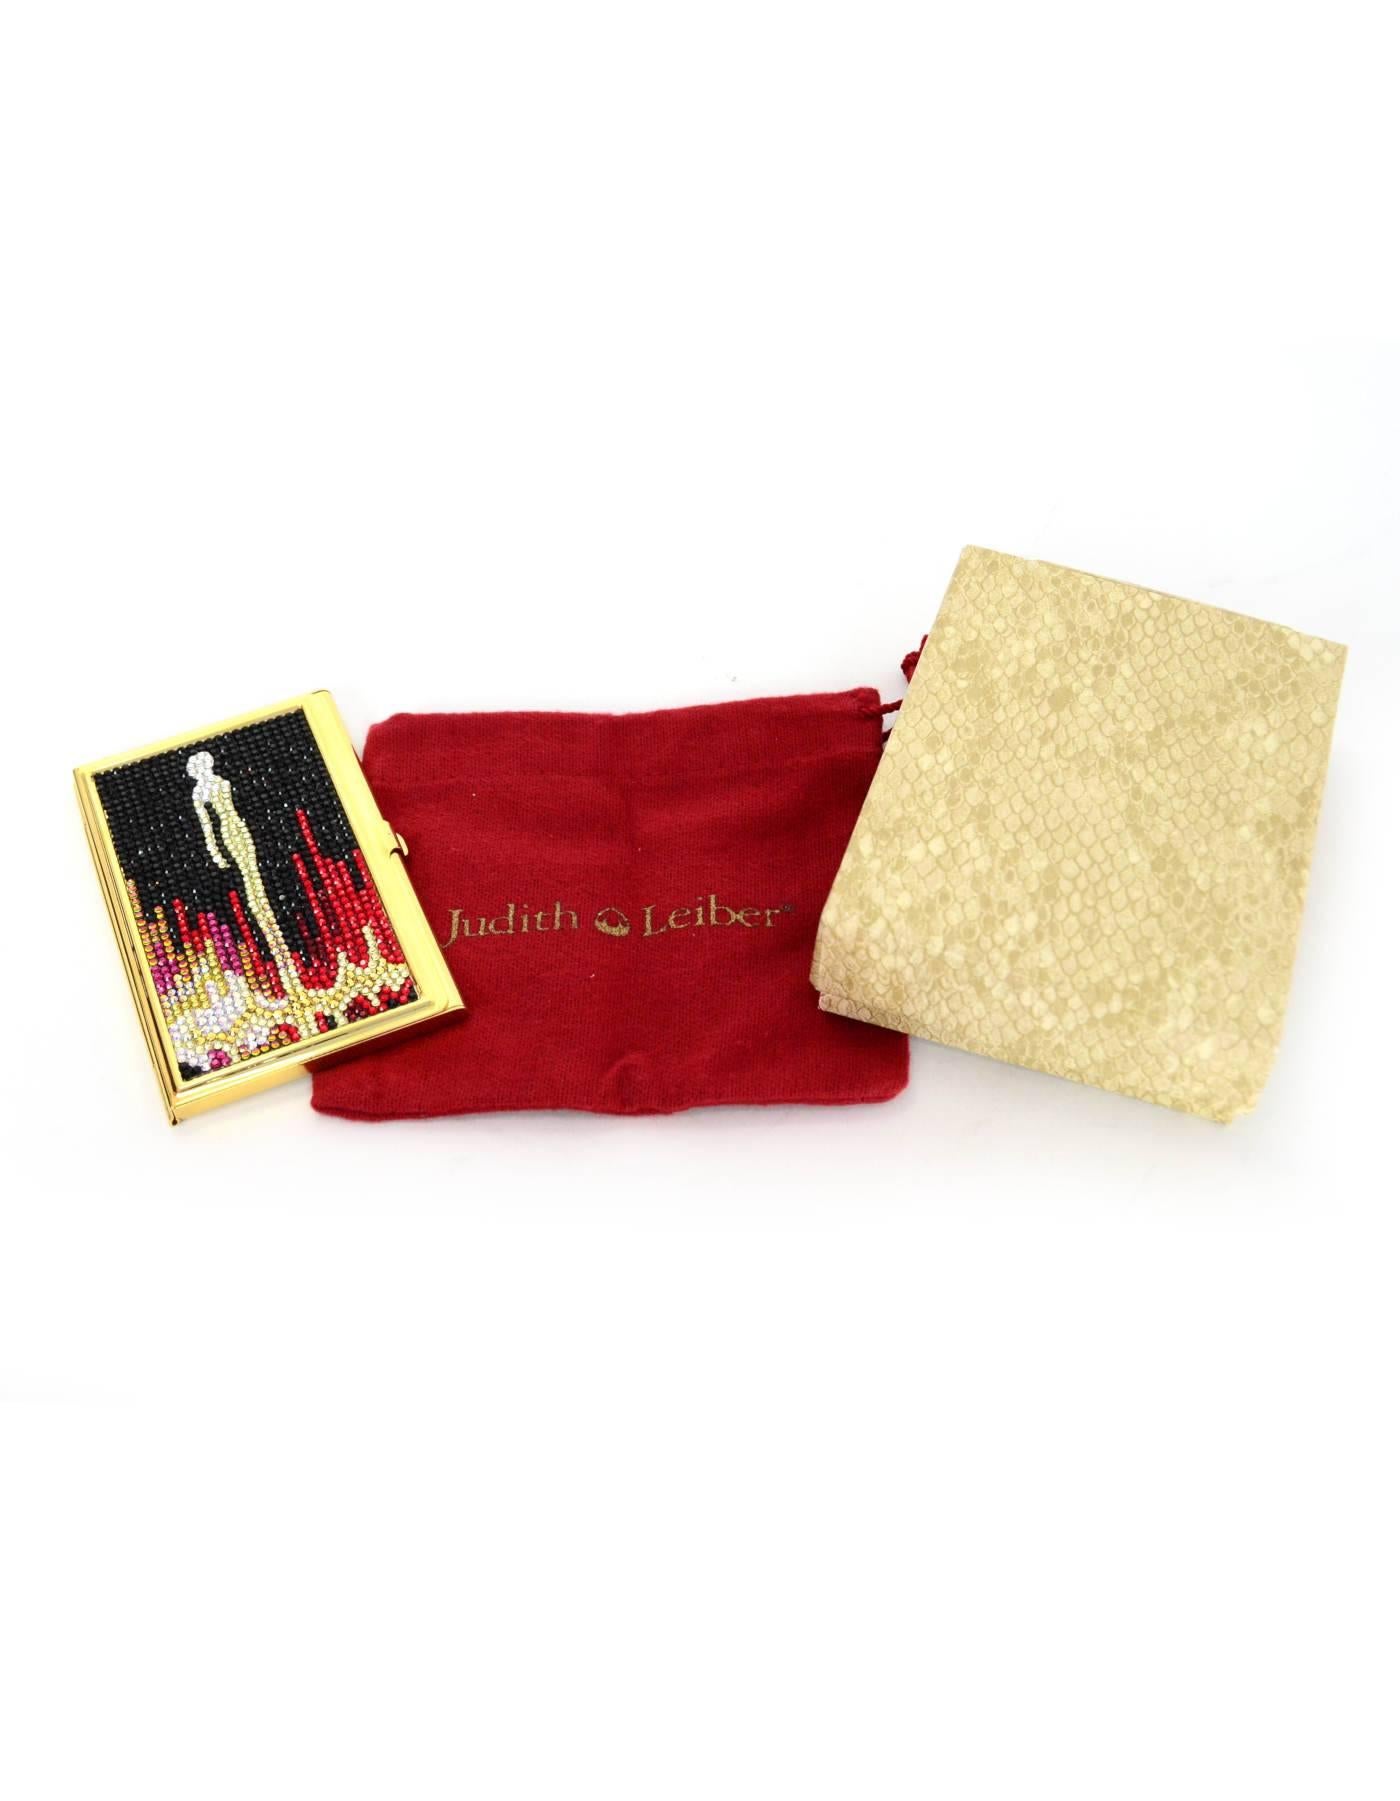 Judith Leiber Celine Dion Black & Red Swarovski Crystal Card Case w. Box In Excellent Condition In New York, NY